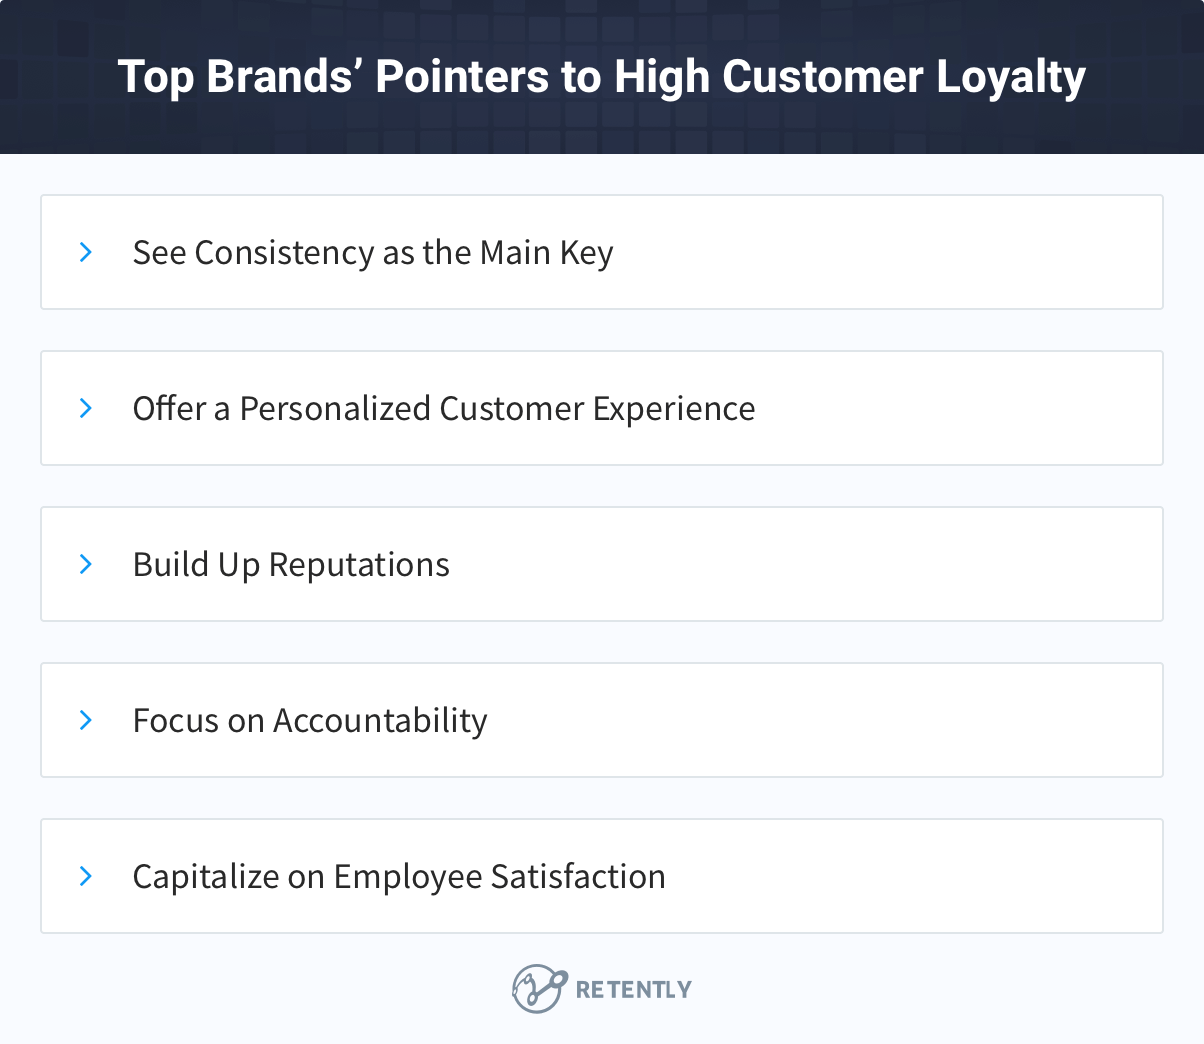 Top Brands’ Pointers to High Customer Loyalty